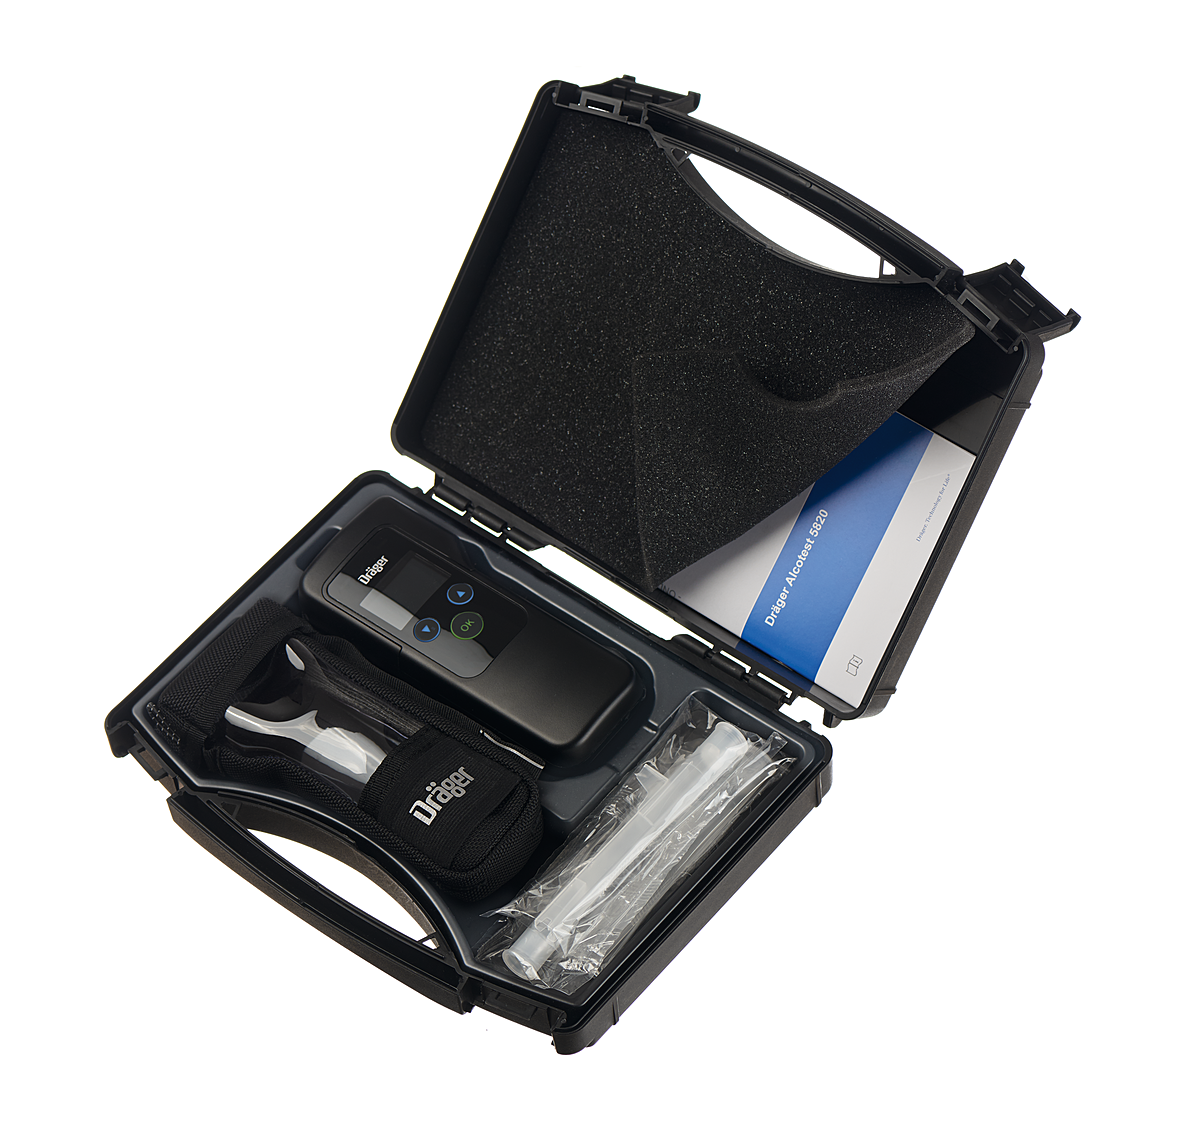 Hard case specially adapted for Dräger Alcotest 6000, 5000 and 7000